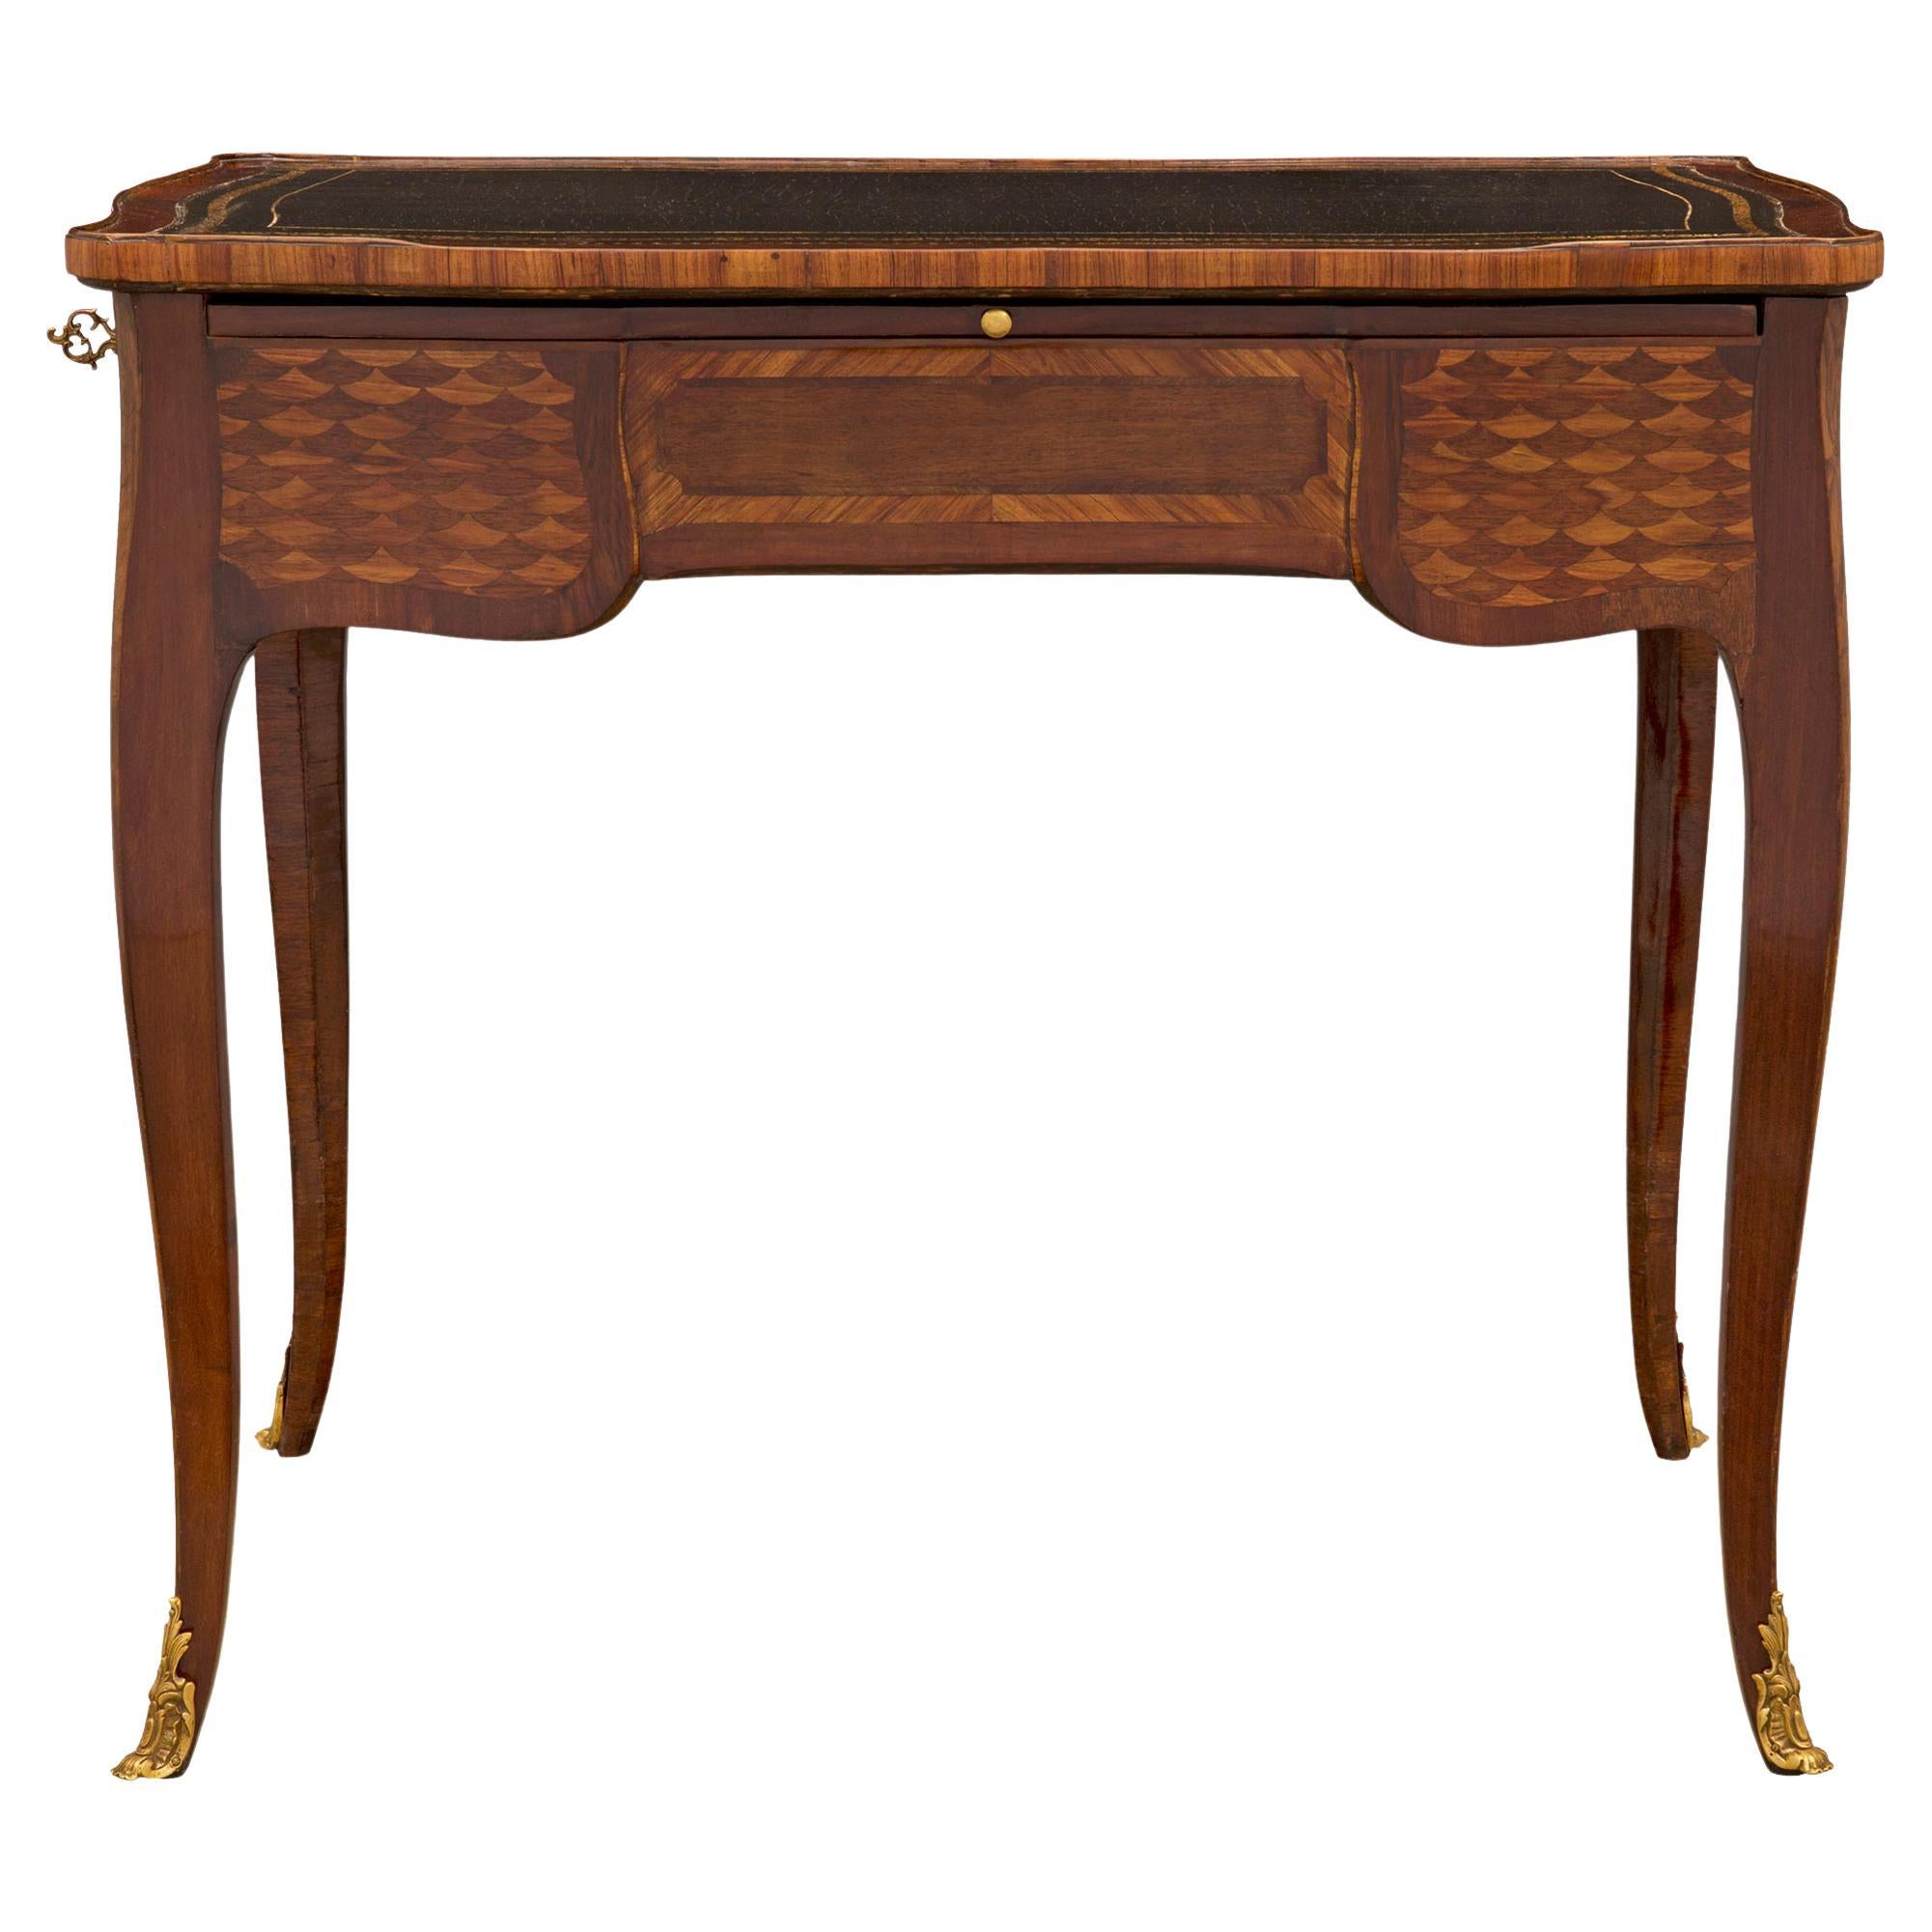 French 18th Century Louis XV Period Kingwood And Tulipwood Desk